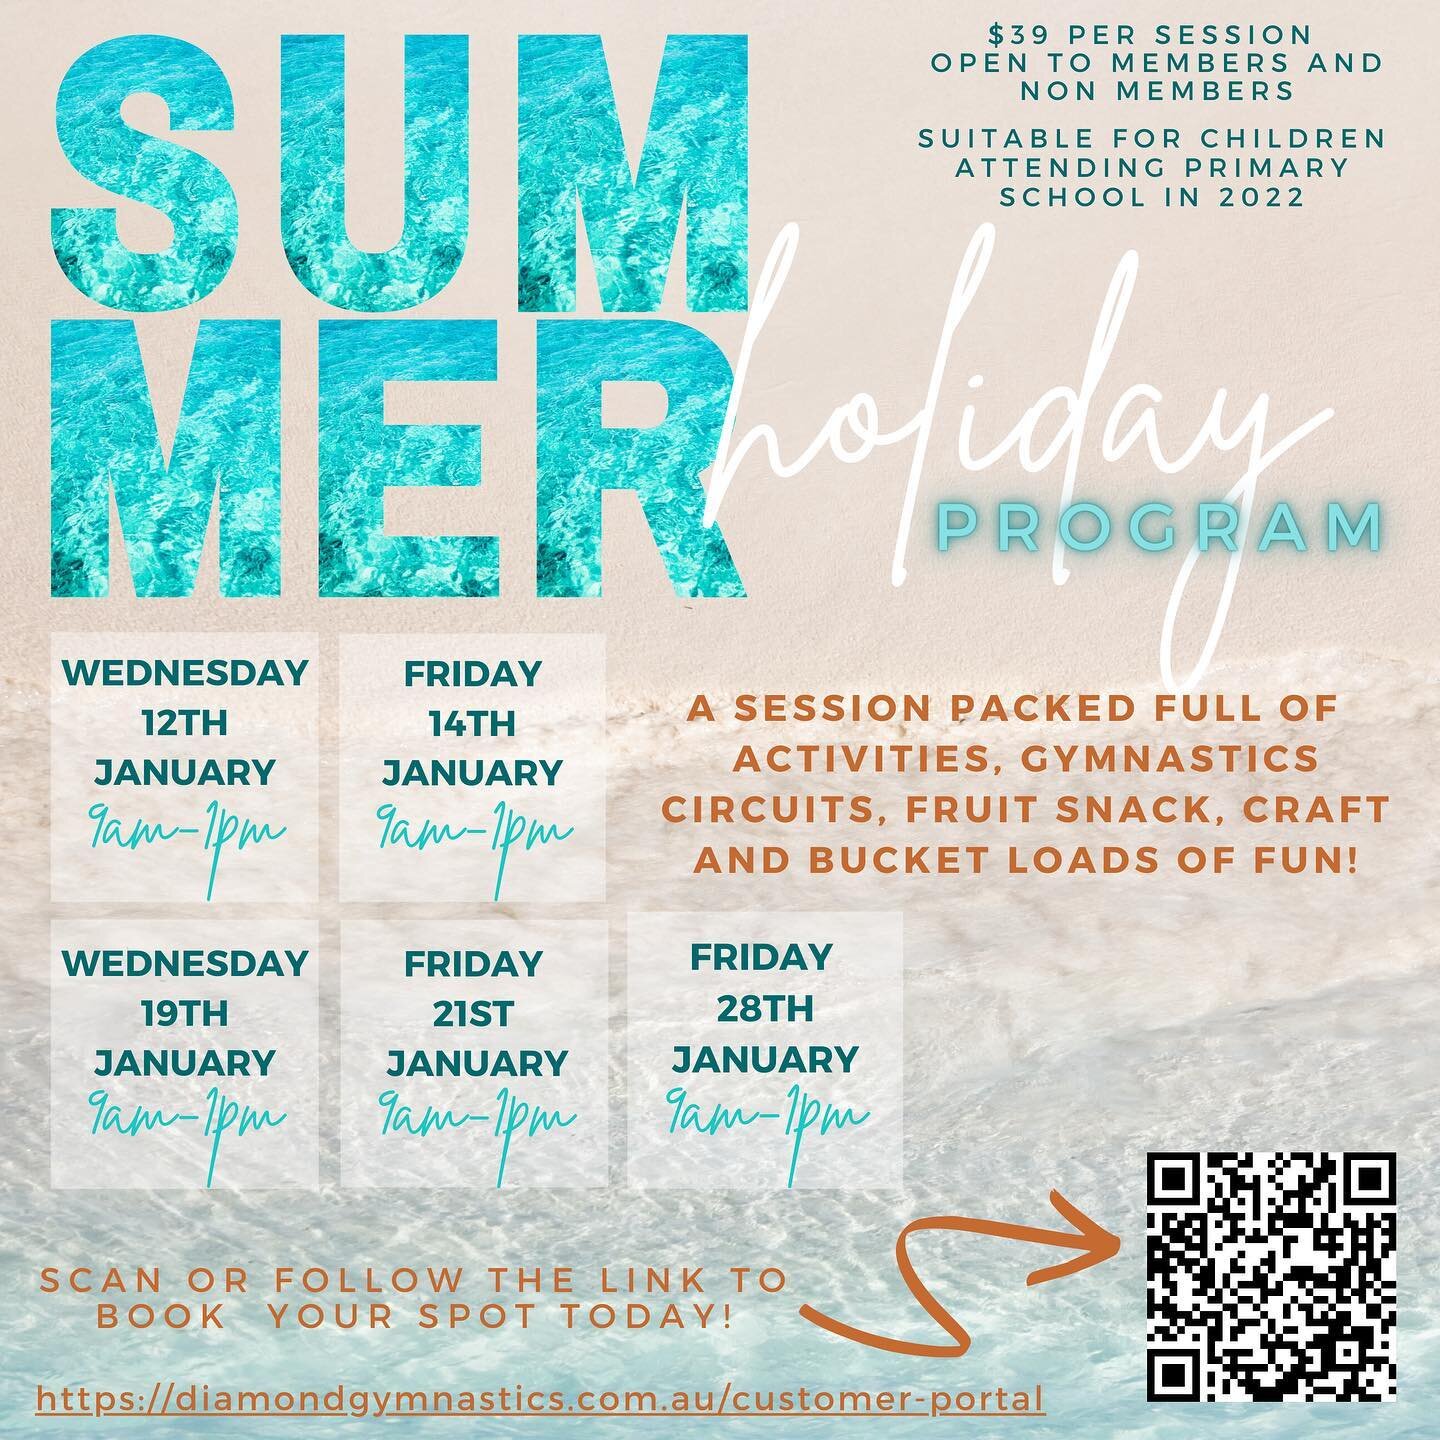 ☀️DGC SUMMER FUN PROGRAM☀️
Not sure what to do with the kids this school holidays? Have they missed their sporting activities this year? Or have they always wanted to try gymnastics? Come and join in our holiday program! 🤸🏼&zwj;♀️🤸🏼&zwj;♀️
💎Sing